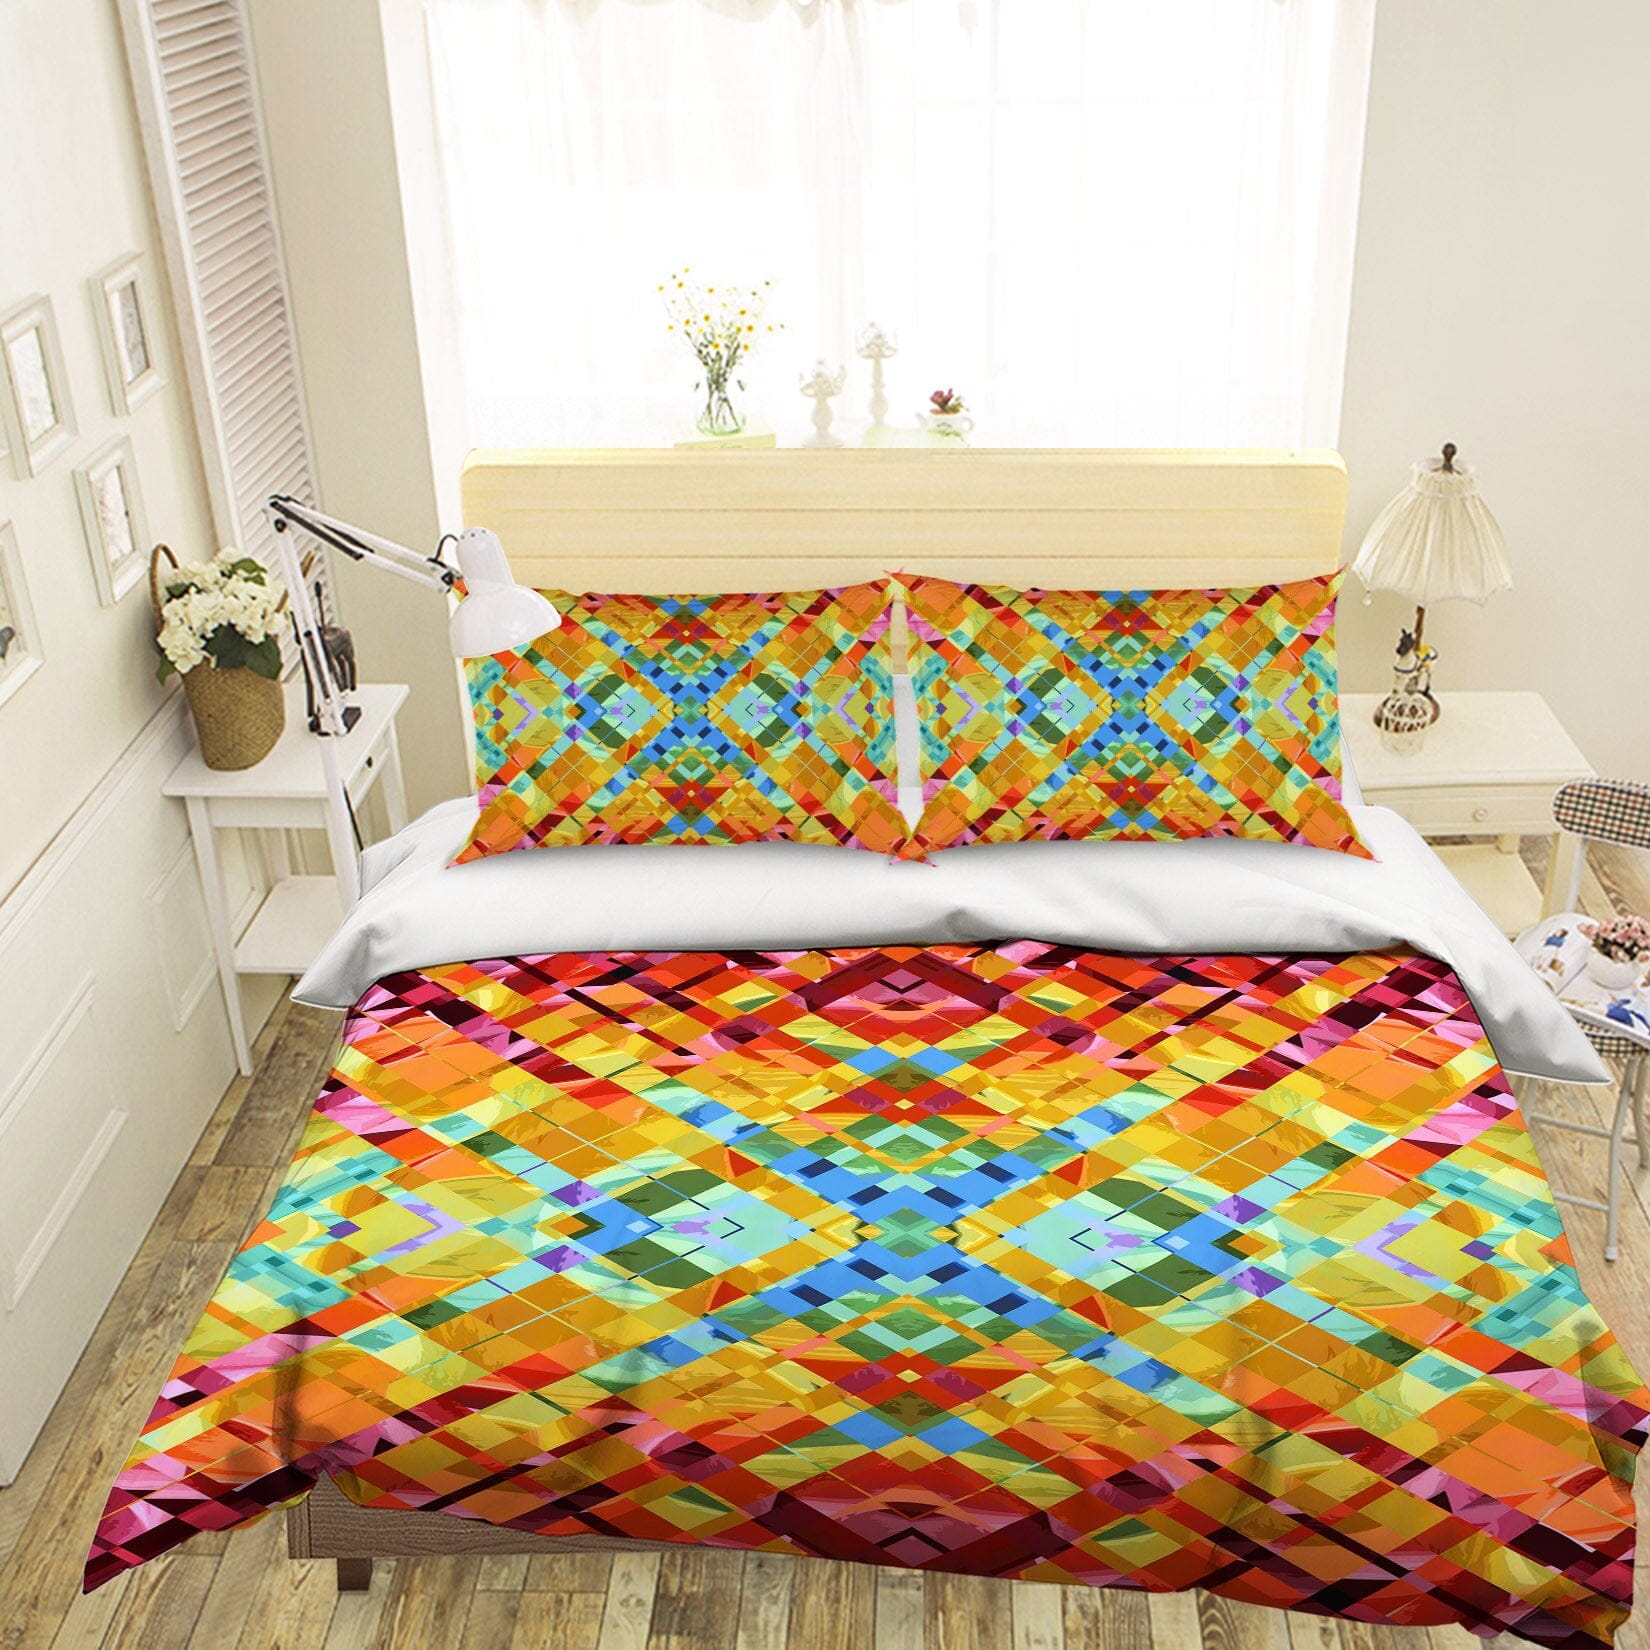 3D Color Weave 2002 Shandra Smith Bedding Bed Pillowcases Quilt Quiet Covers AJ Creativity Home 